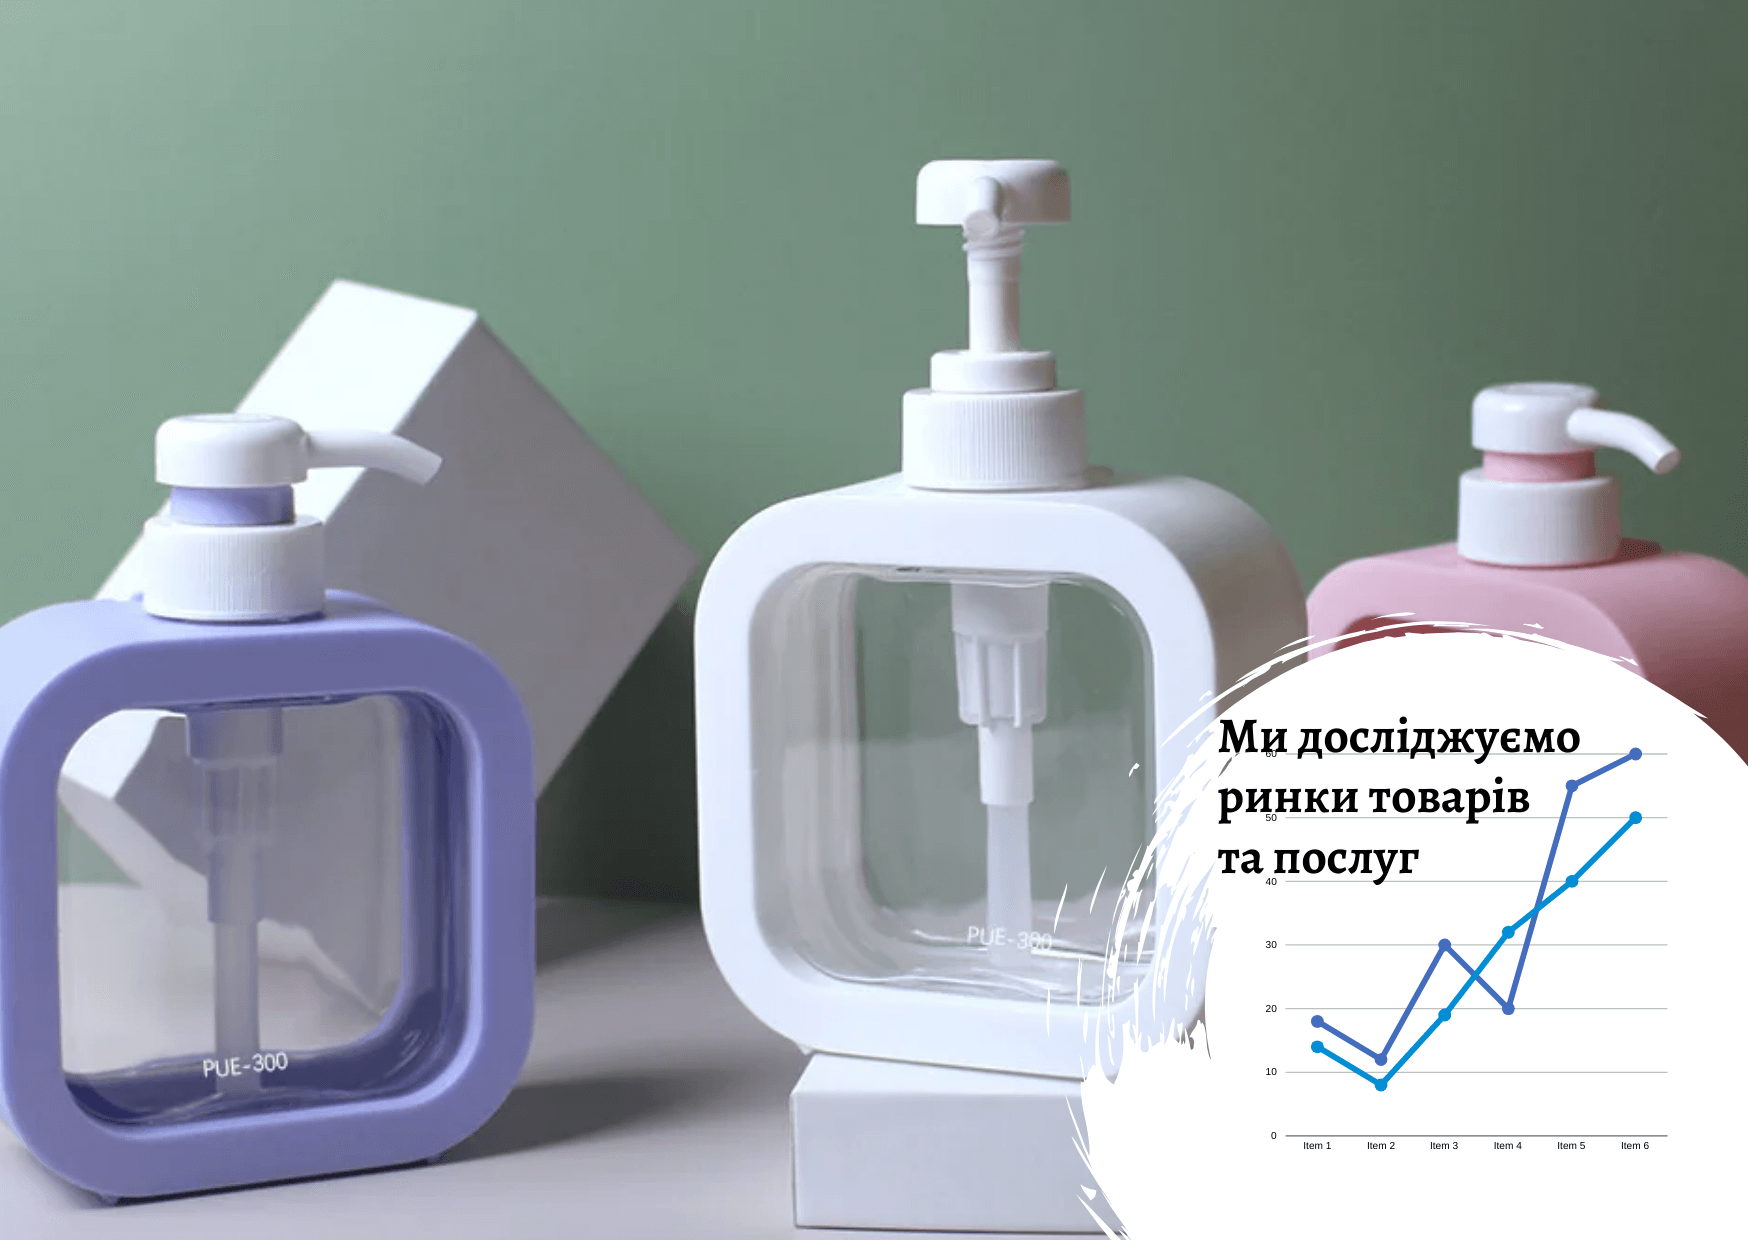 Ukrainian plastic dispensers and cleaning brushes markets: import analysis 